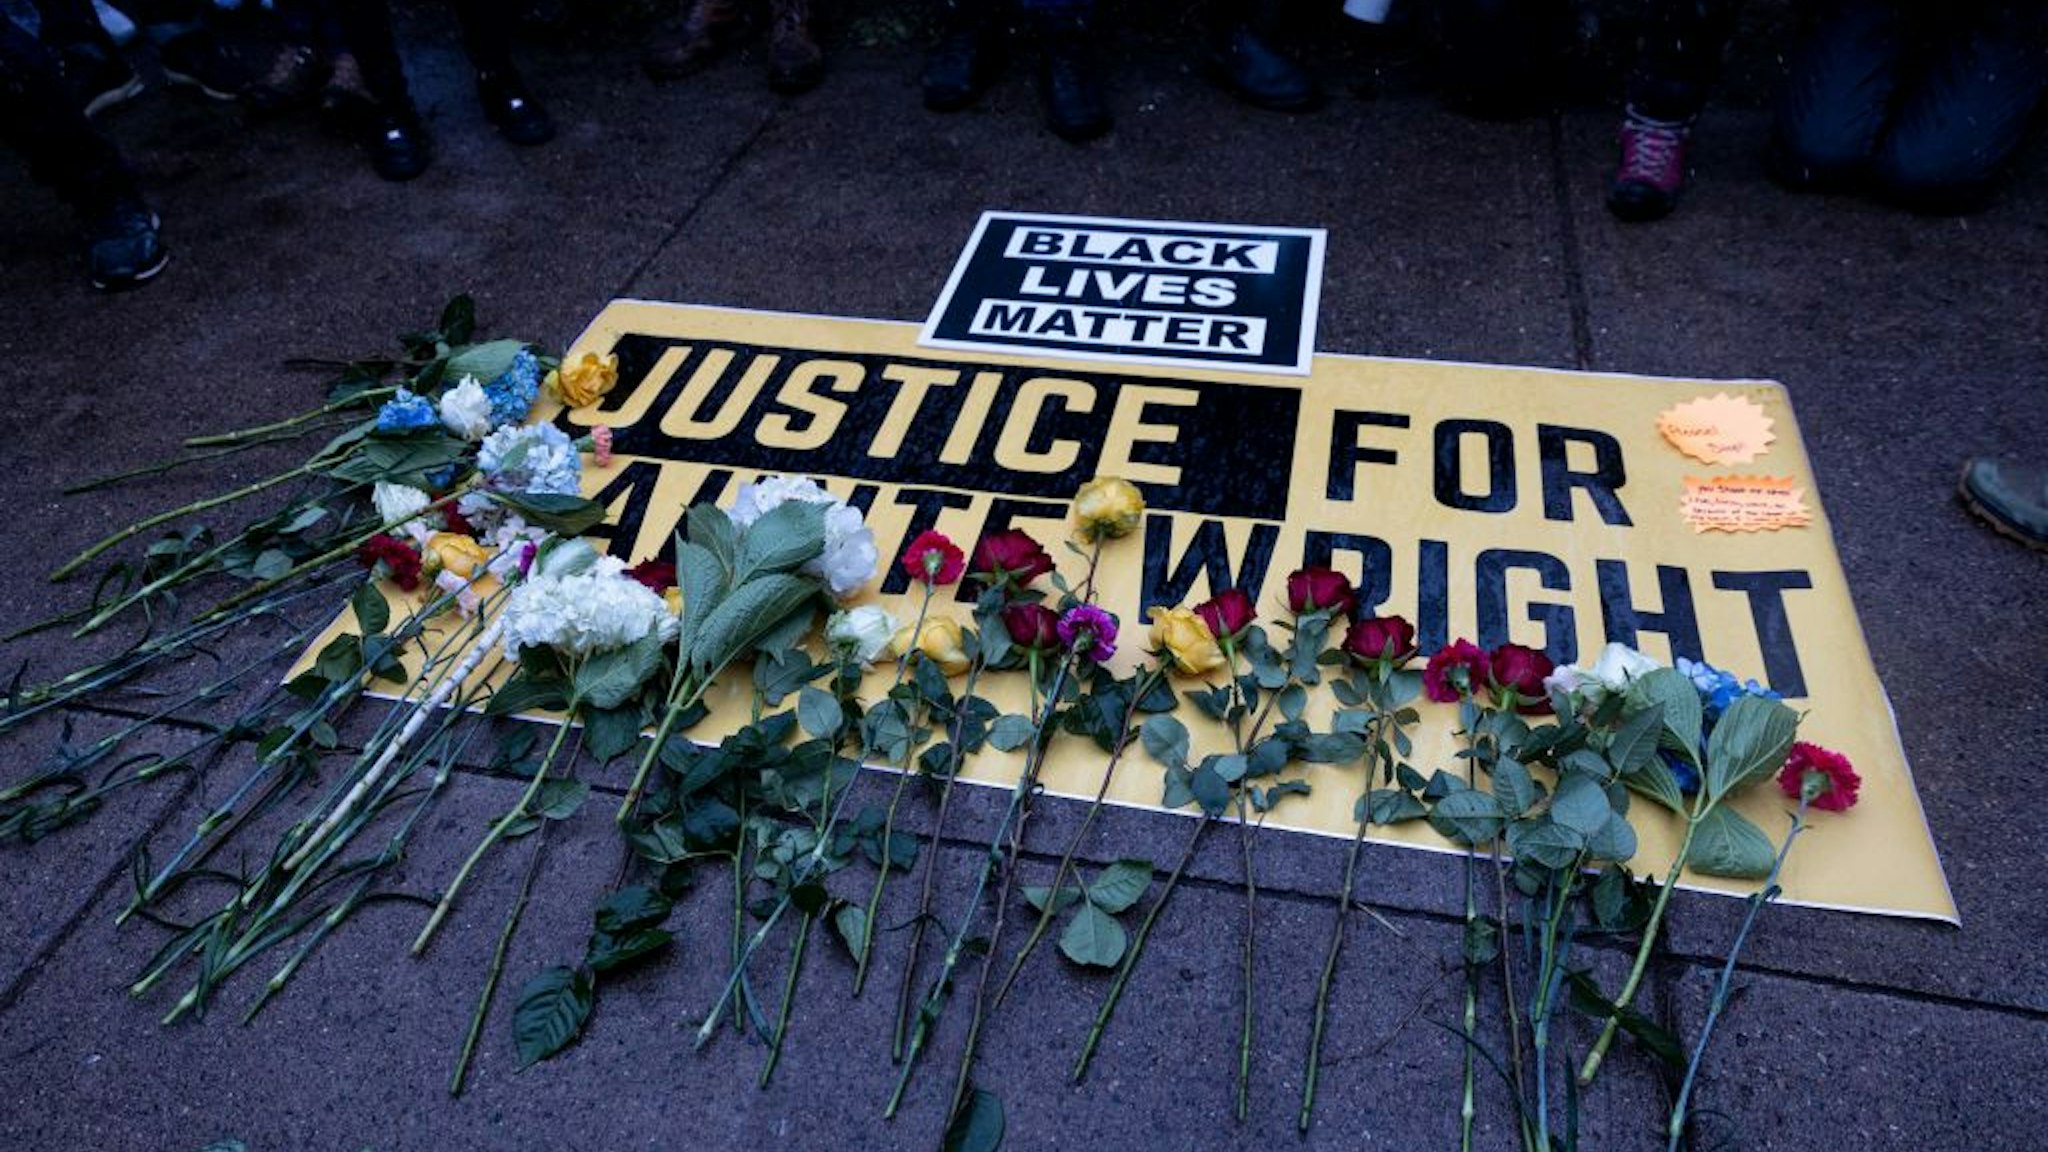 People lay flowers on a sign as they rally outside the Brooklyn Center police station to protest the death of Daunte Wright who was shot and killed by a police officer in Brooklyn Center, Minnesota on April 13, 2021. - Tensions have soared over the death on April 11 of African American Daunte Wright near the Midwestern US city, a community already on edge over the ongoing trial of a policeman accused of killing another Black man, George Floyd. (Photo by Kerem YUCEL / AFP) (Photo by KEREM YUCEL/AFP via Getty Images)